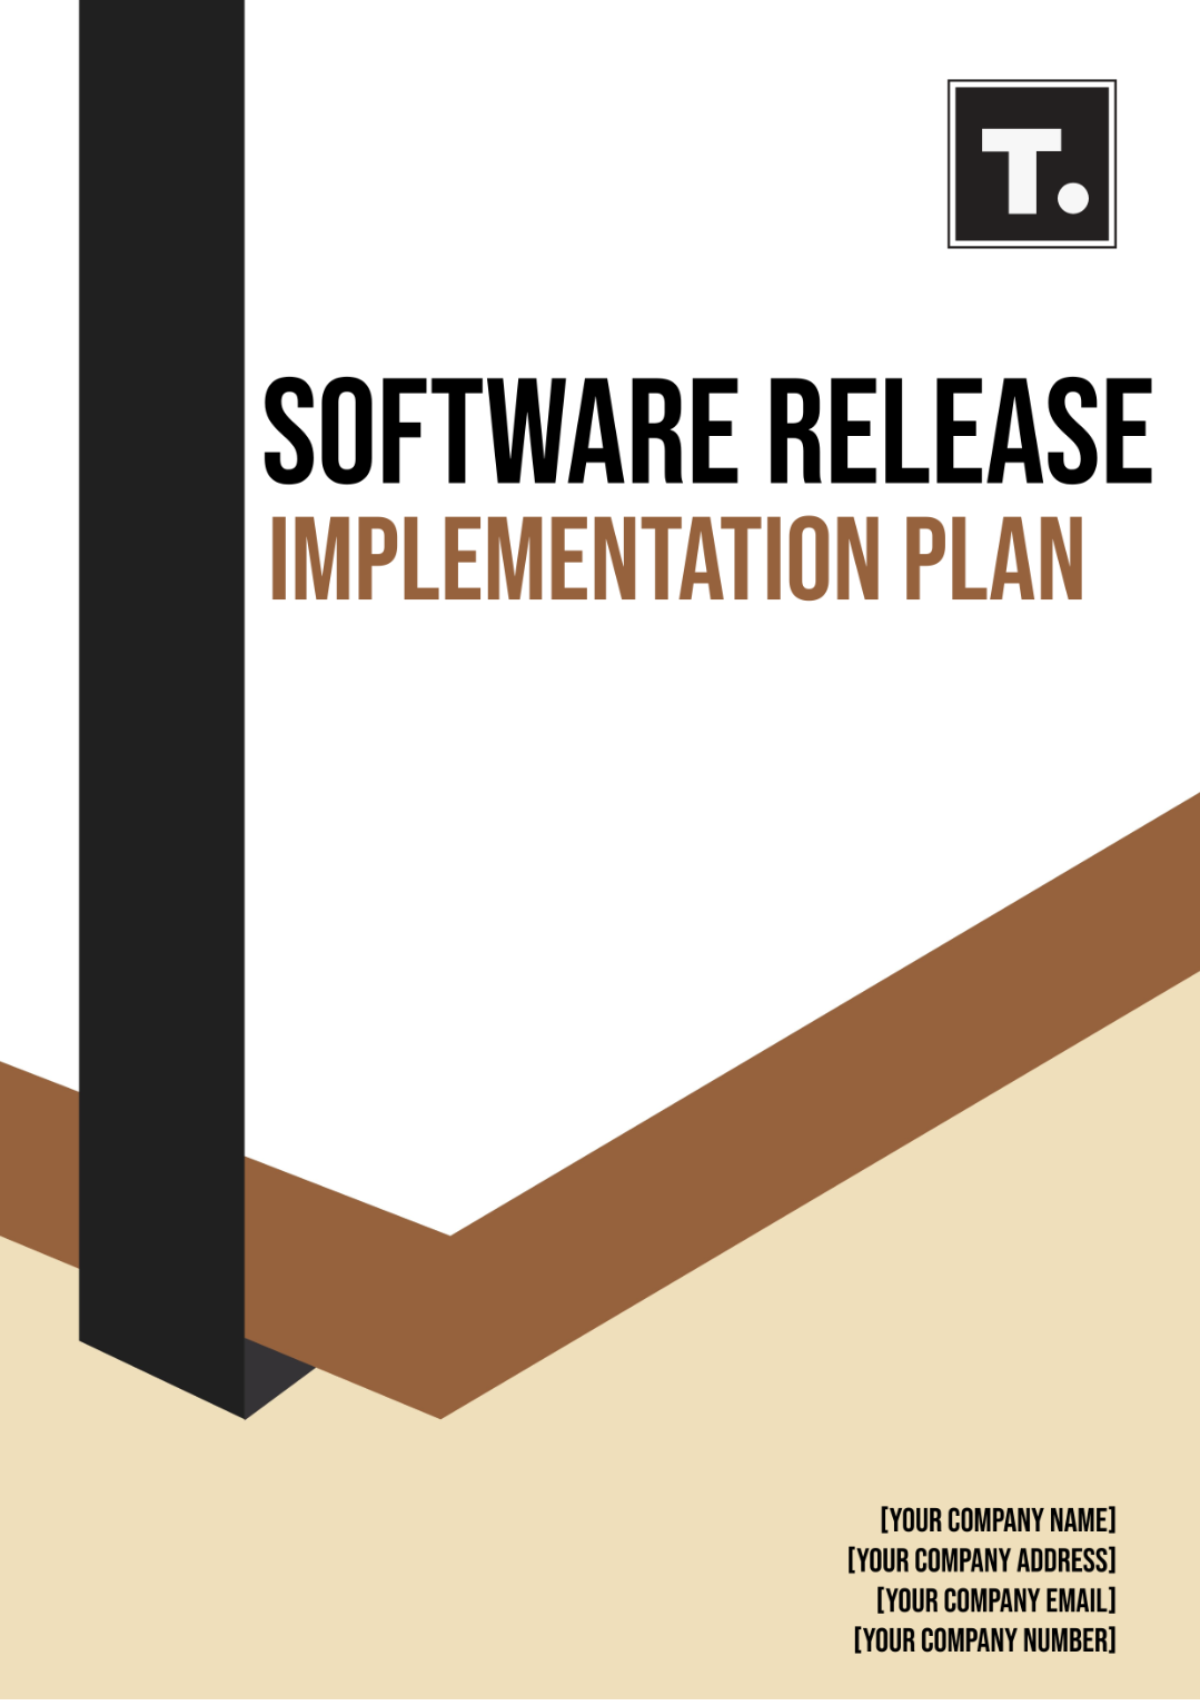 Software Release Implementation Plan Template